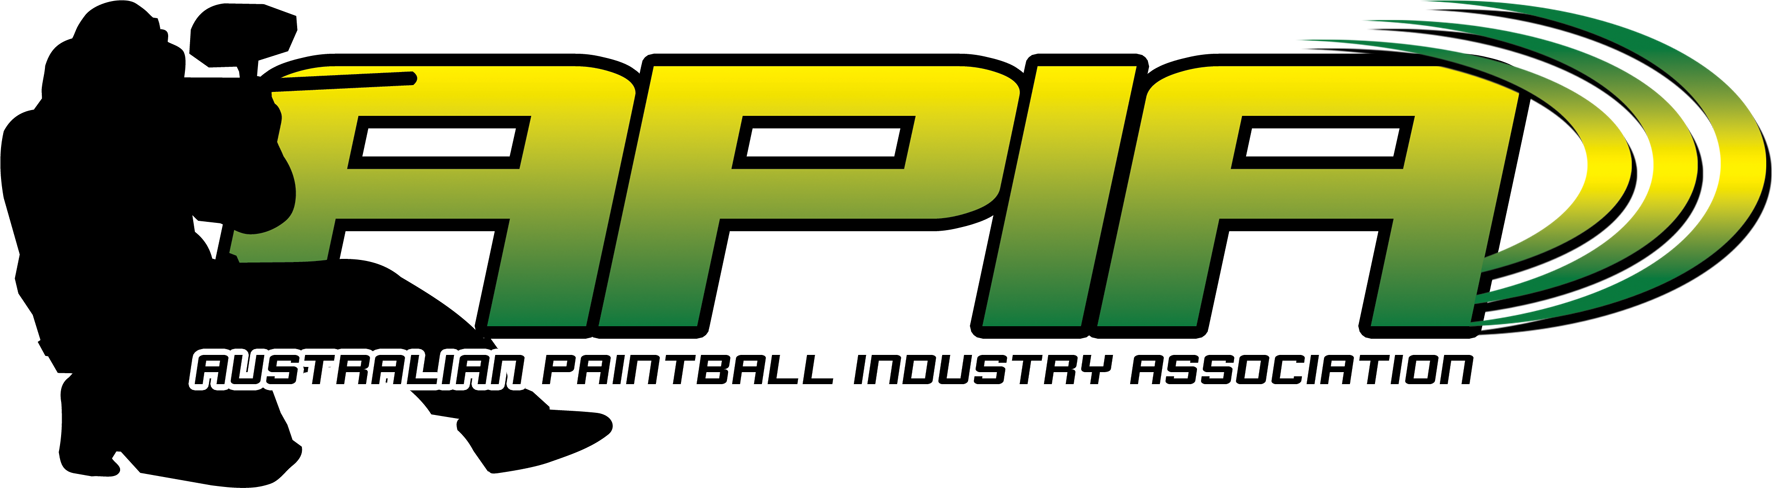 Campaigning for the Australian paintball industry